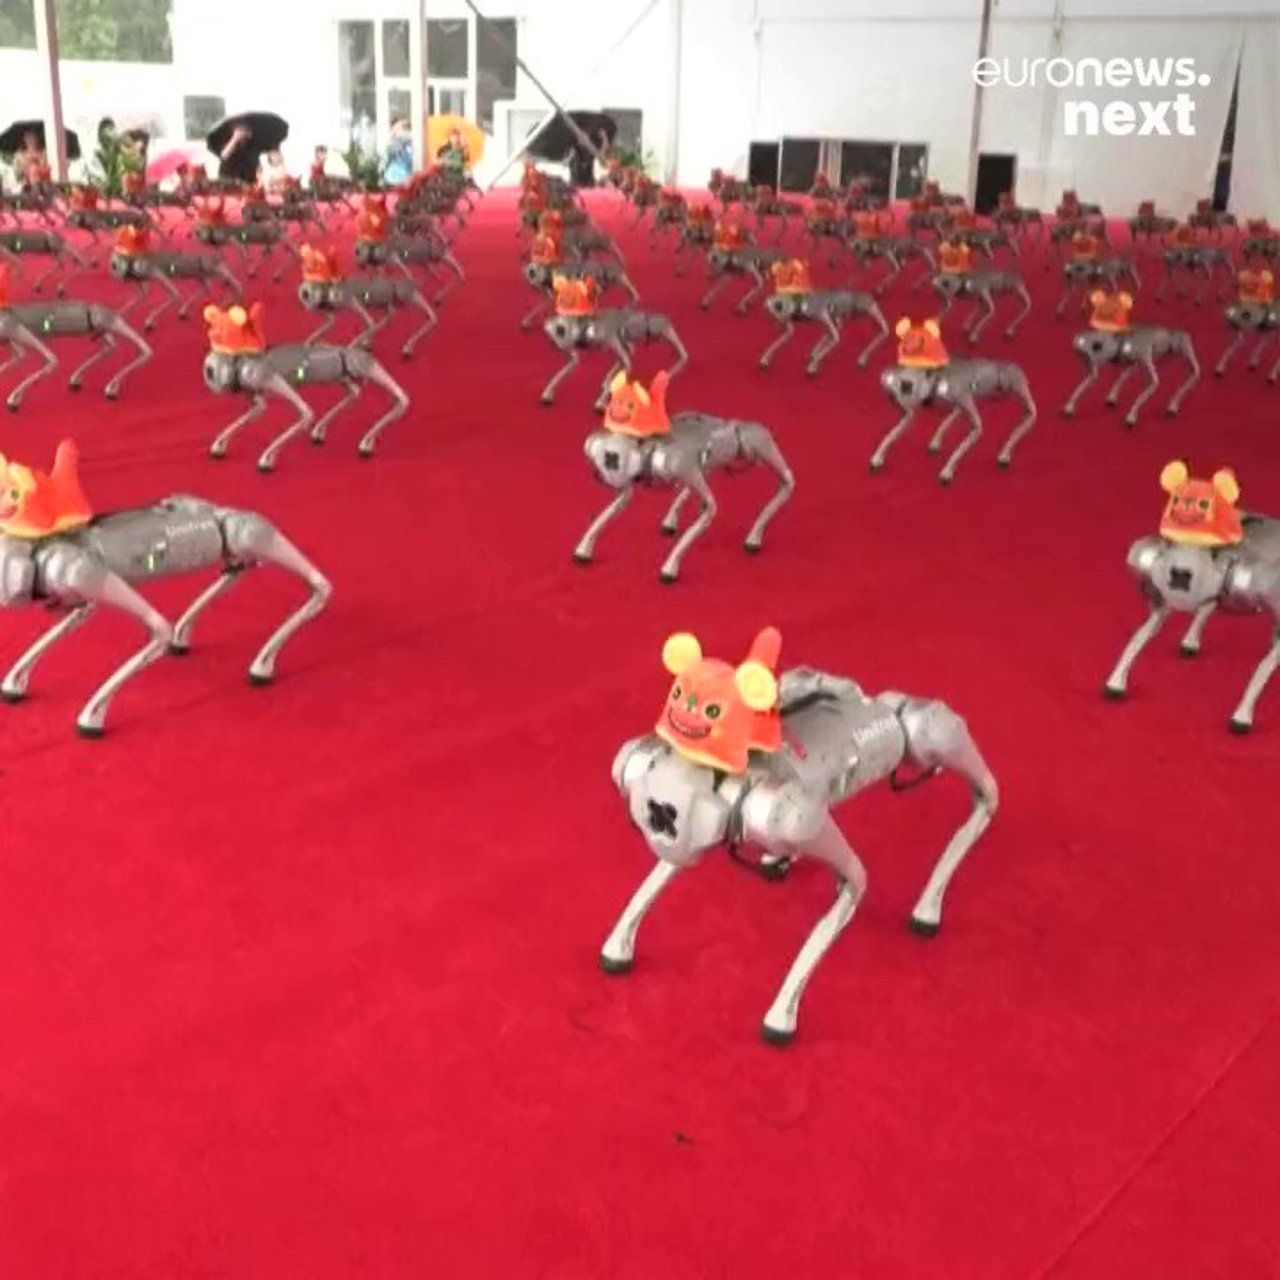 Highlights of the annual World #Robot Conference in Beijing by @euronewsnext #AI #ArtificialIntelligence #MI #Robotics #Engineering #Innovation #FutureOfWork #Tech #Technology cc: @terenceleungsf @wil_bielert @ronald_vanloon https://t.co/aNWmM6IXUq